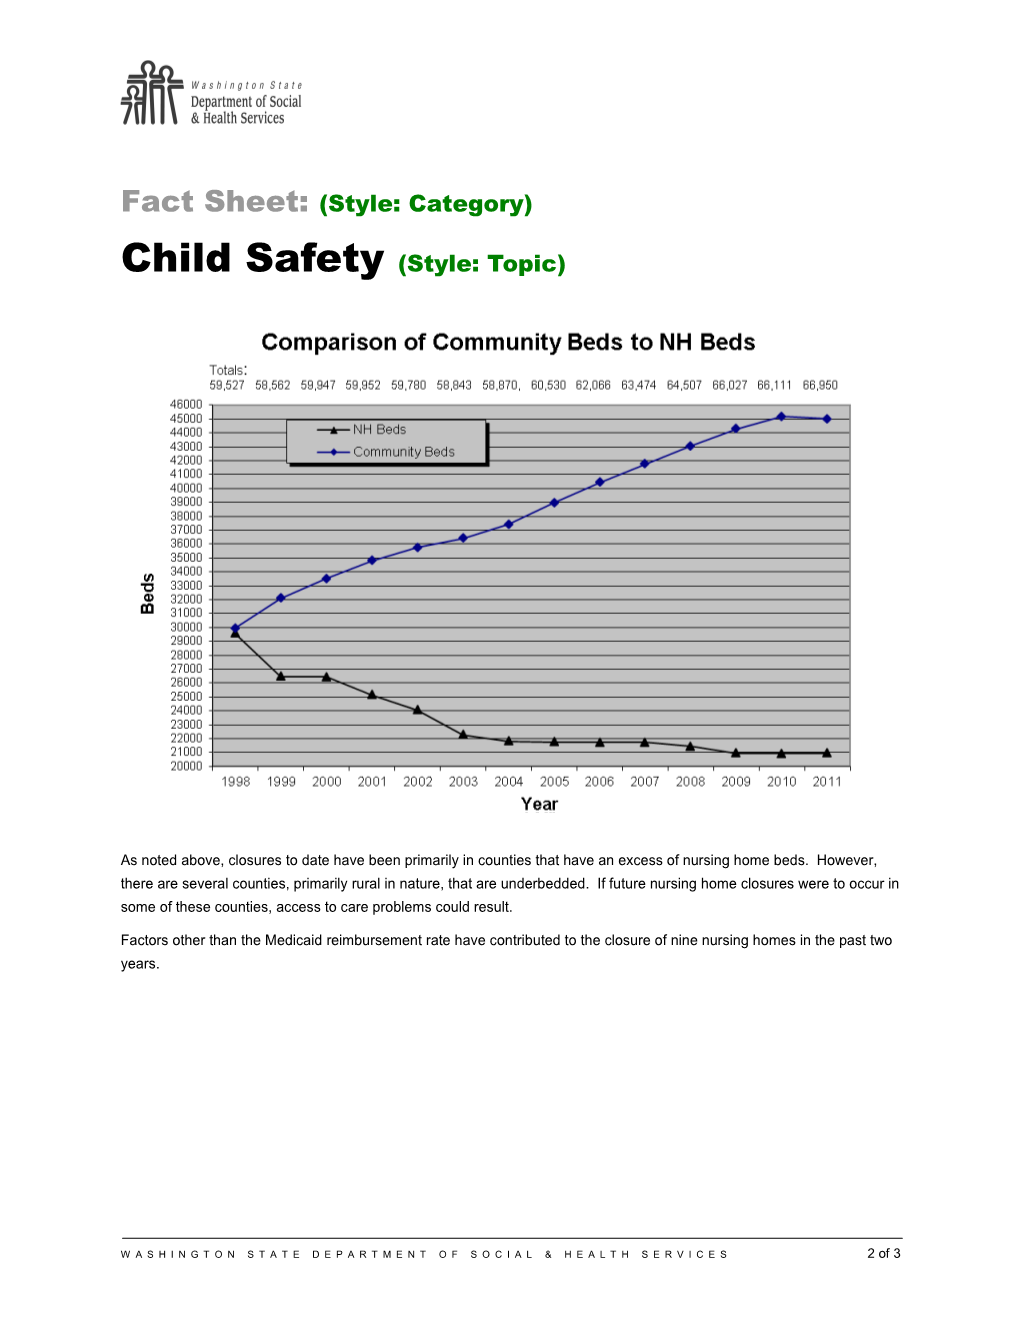 Child Safety (Style: Topic)